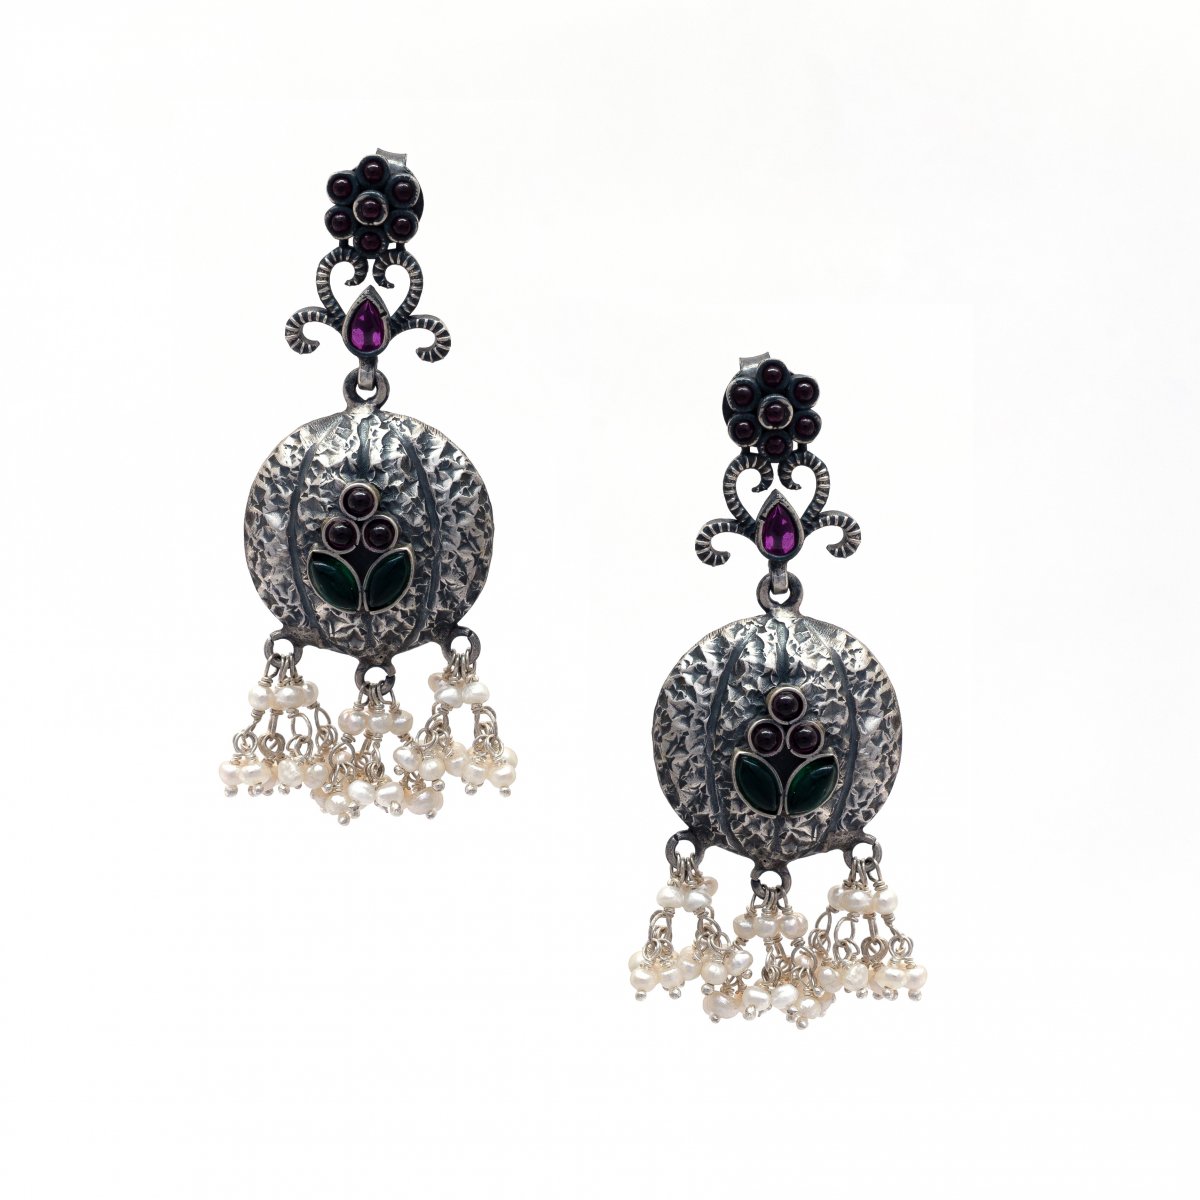 92.5 OXIDIZED SILVER  LIGHT WEIGHT EARRINGS FOR WOMEN AND GIRLS 